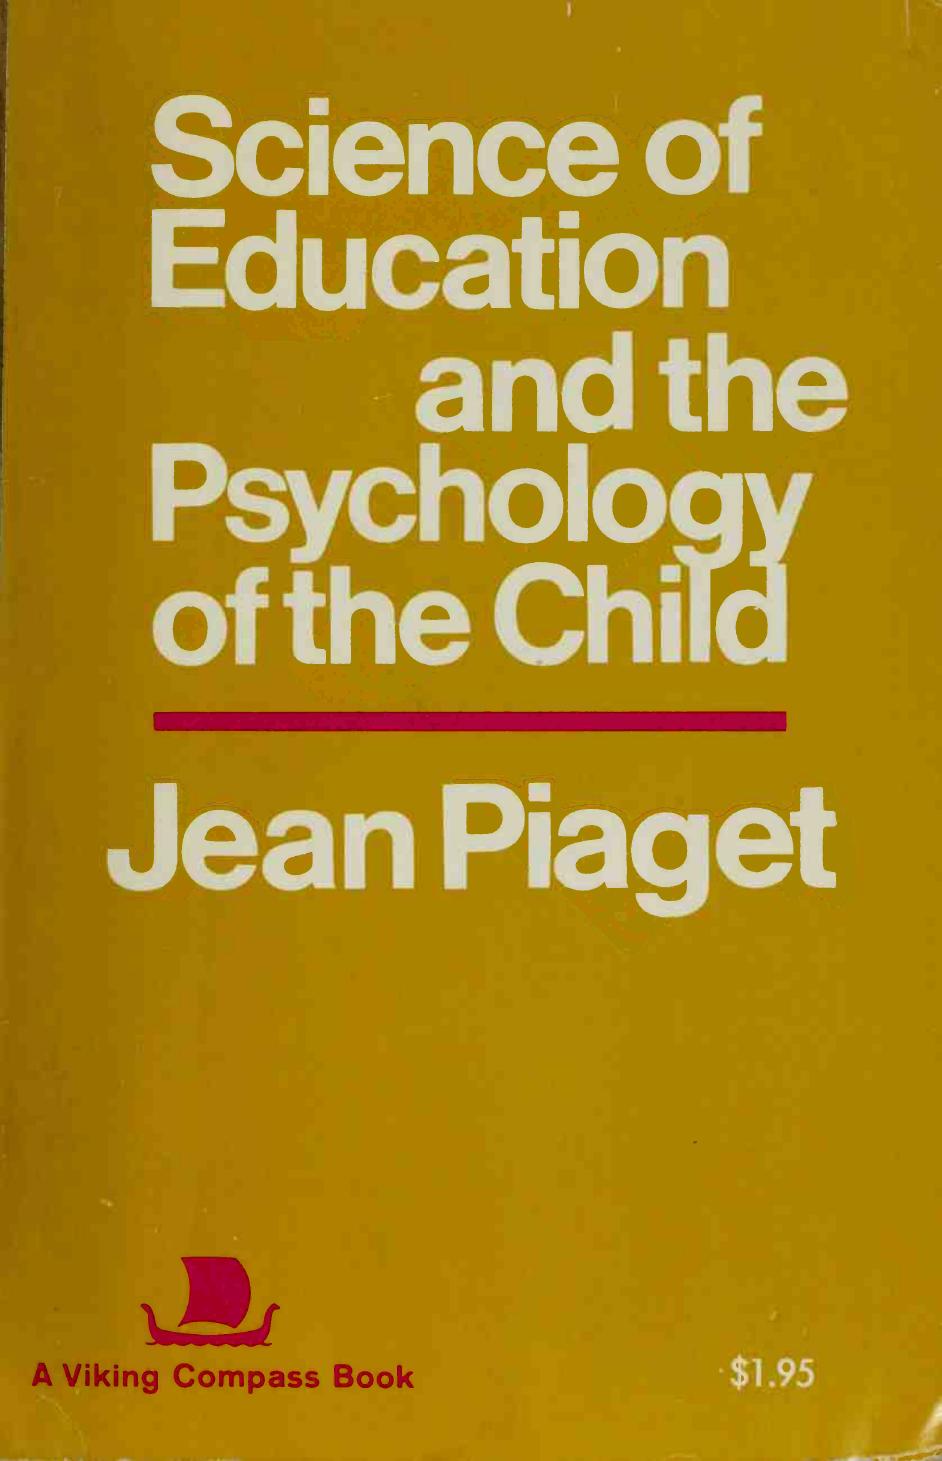 Science of Education and the Psychology of the Child